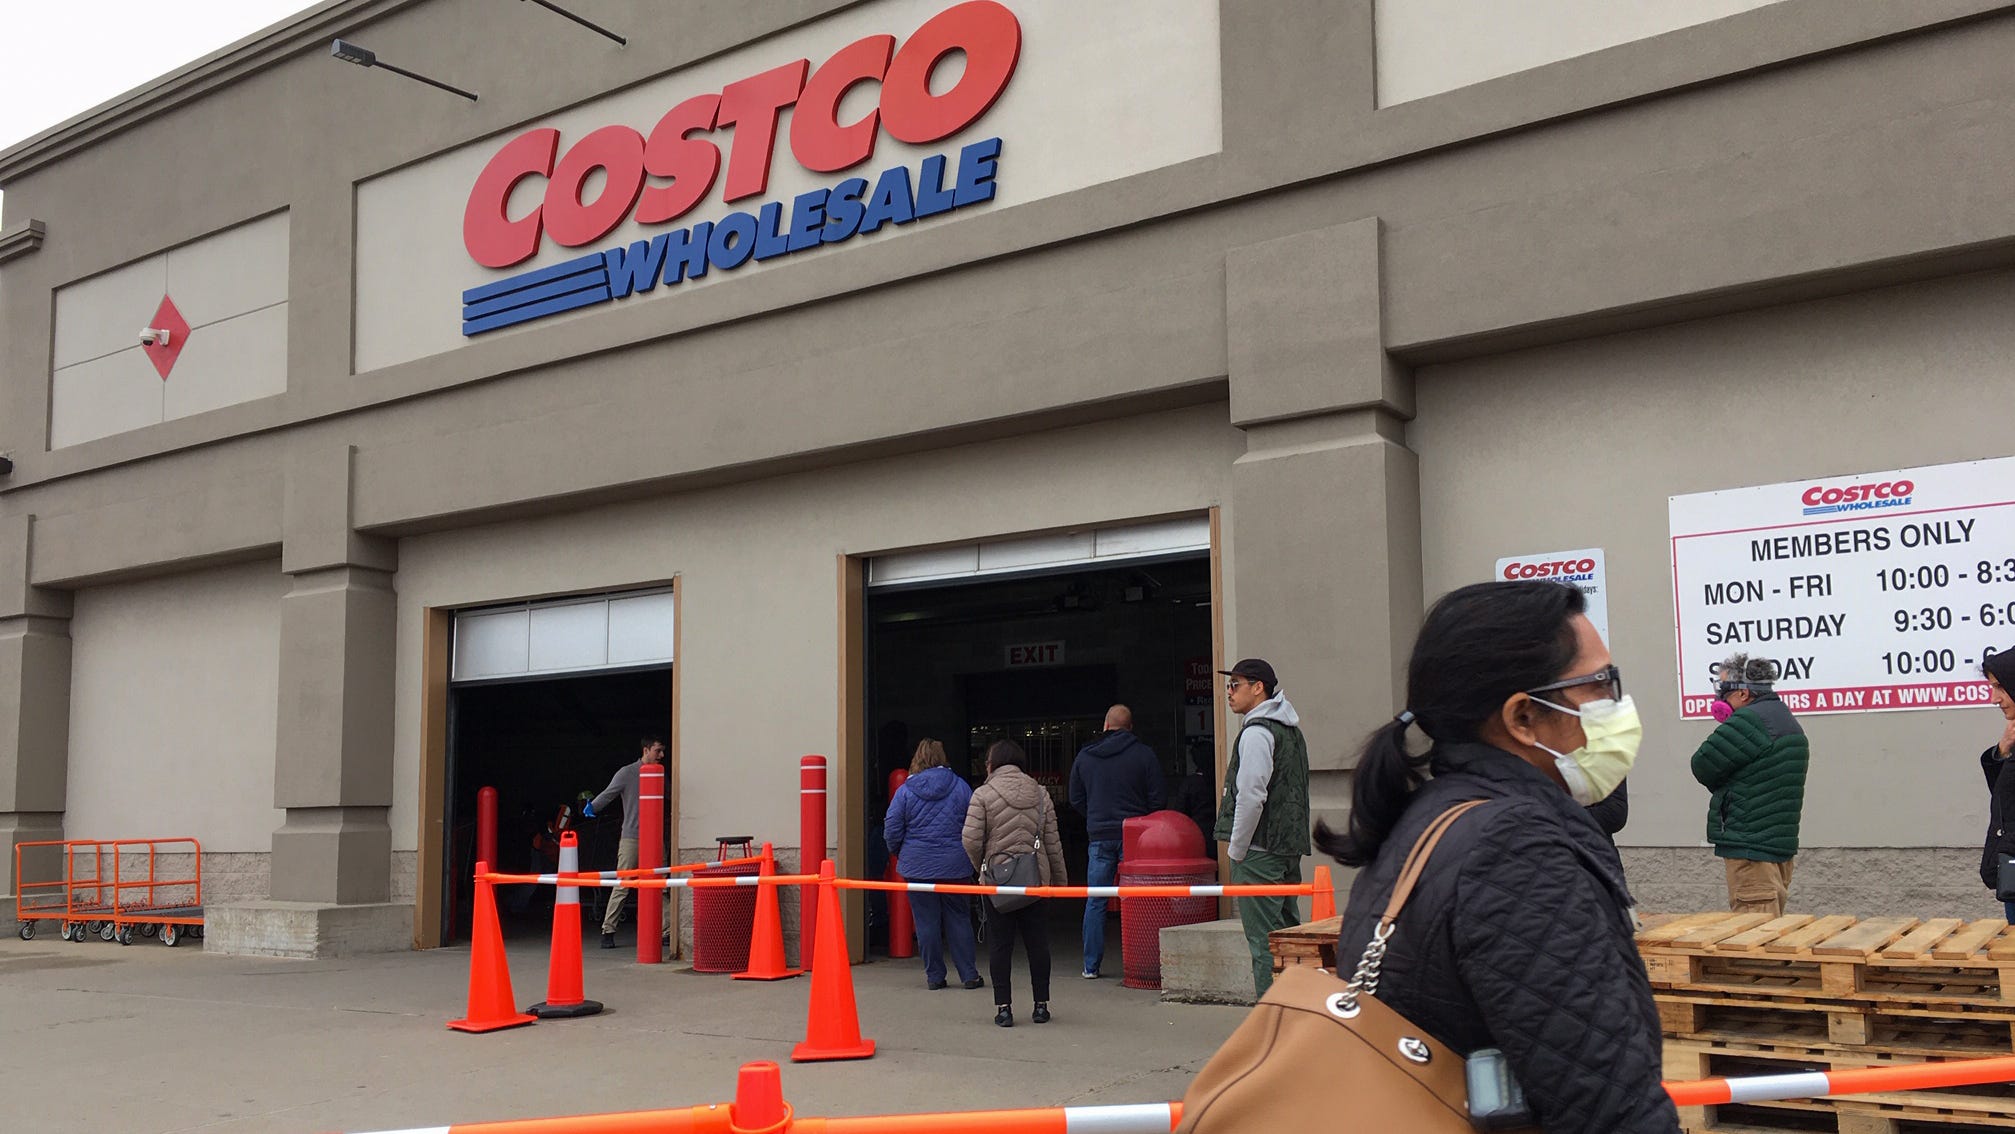 Costco senior hours: Special hours will be reduced week of July 13